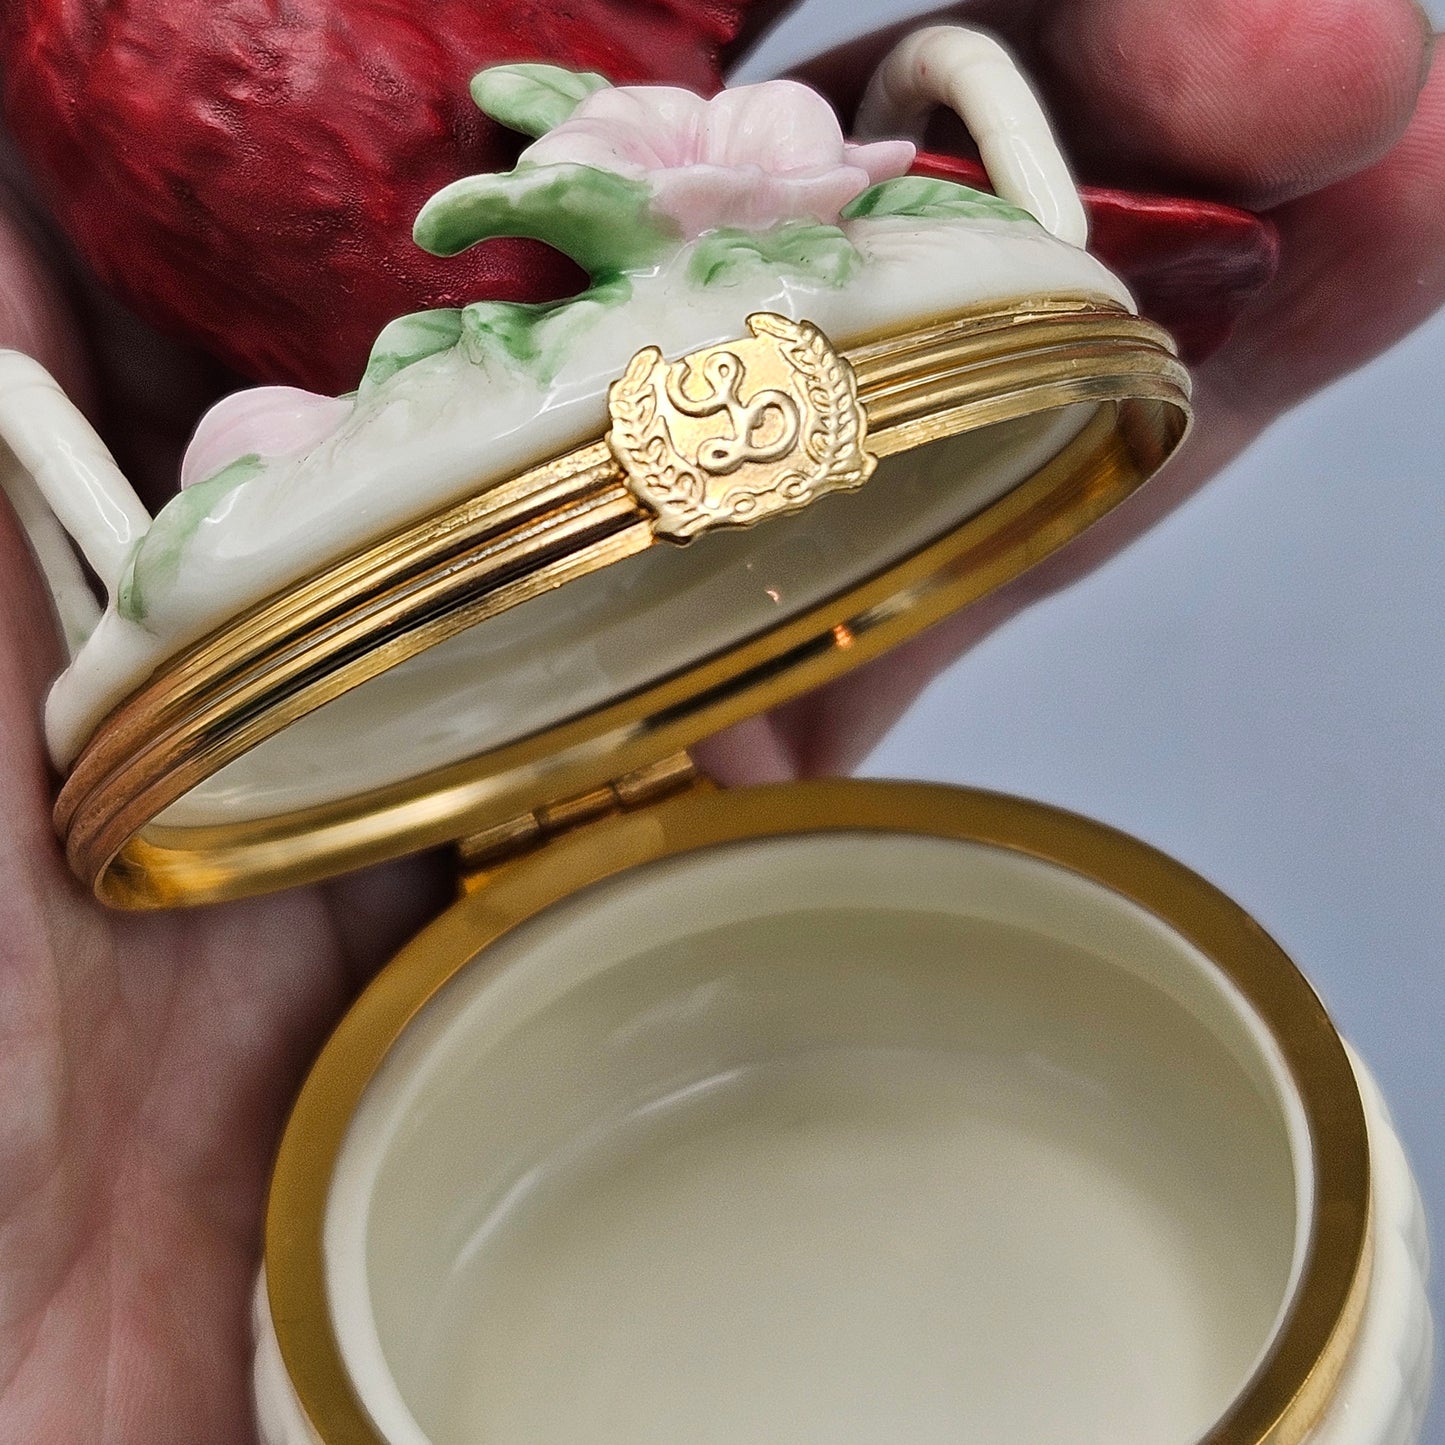 Lenox Porcelain Hinged Trinket Box with Red Cardinal & Flowers